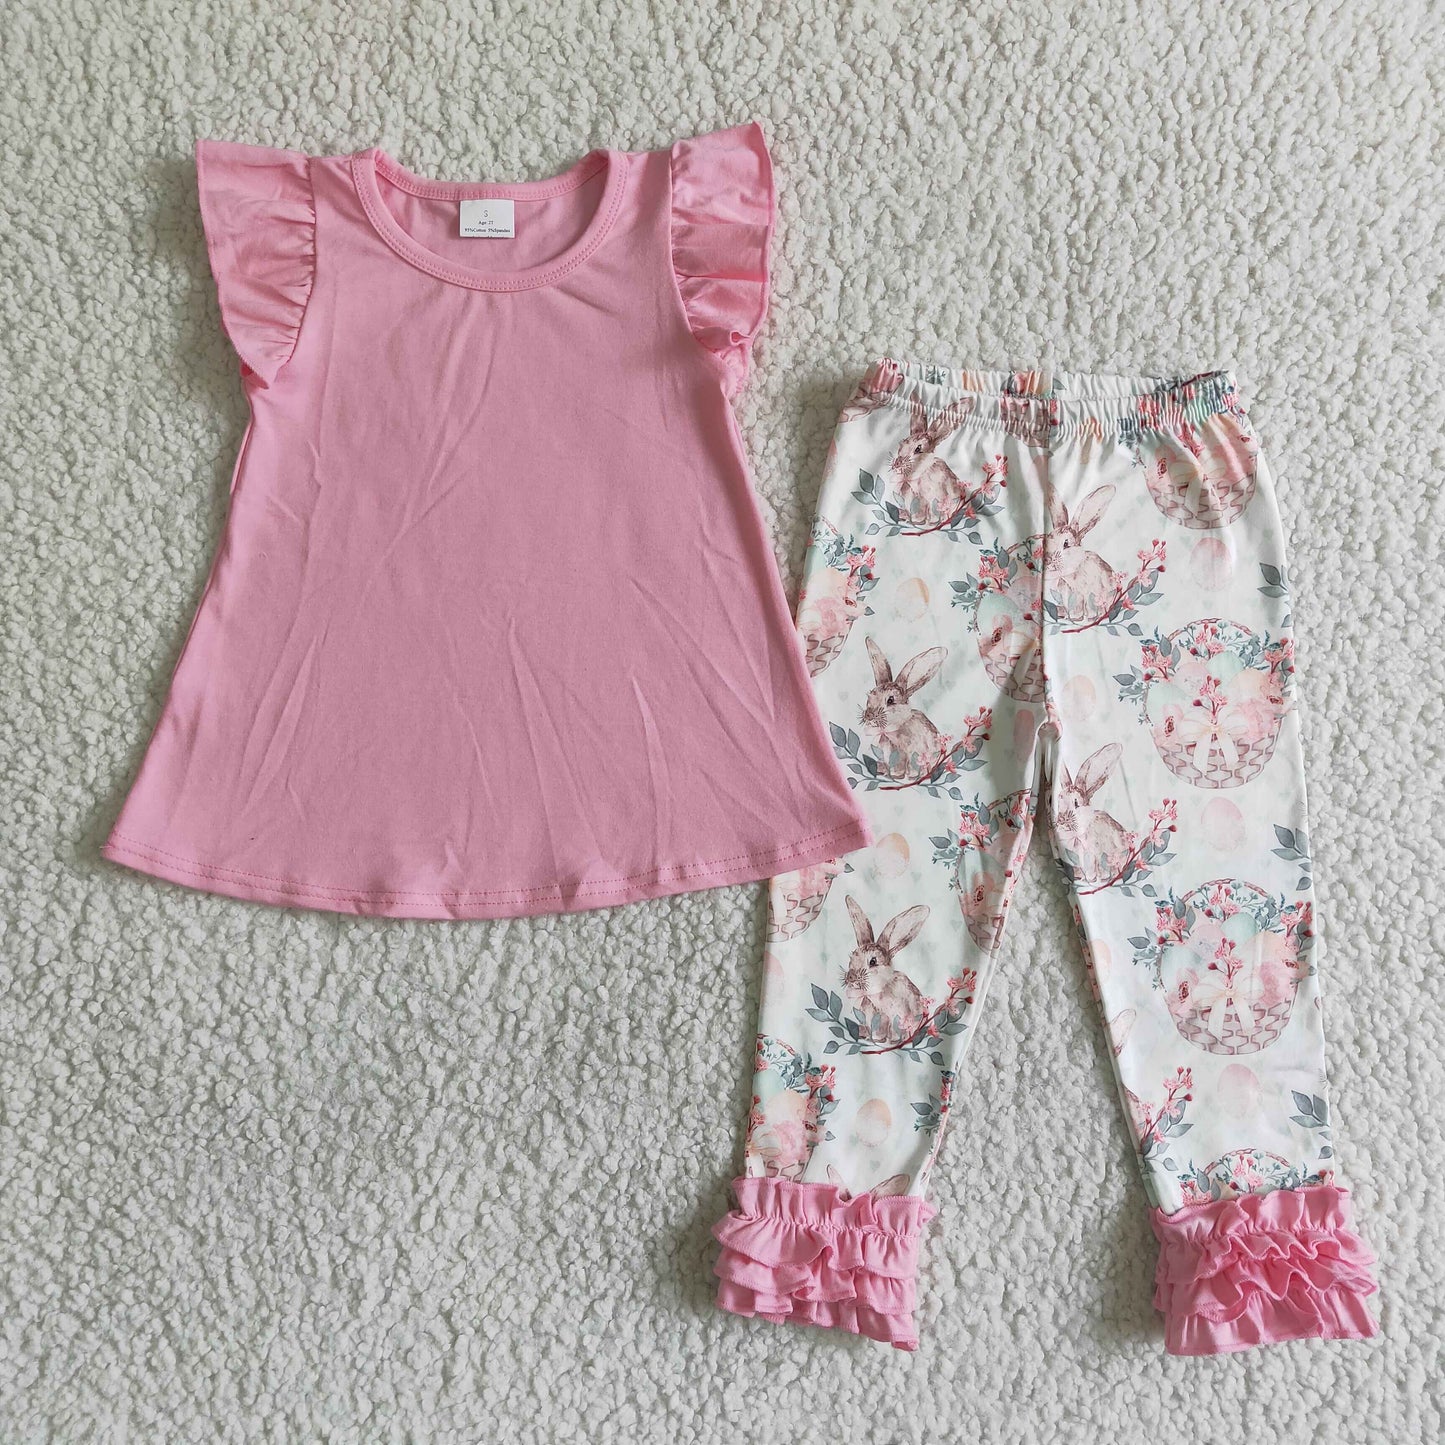 pink easter outfits